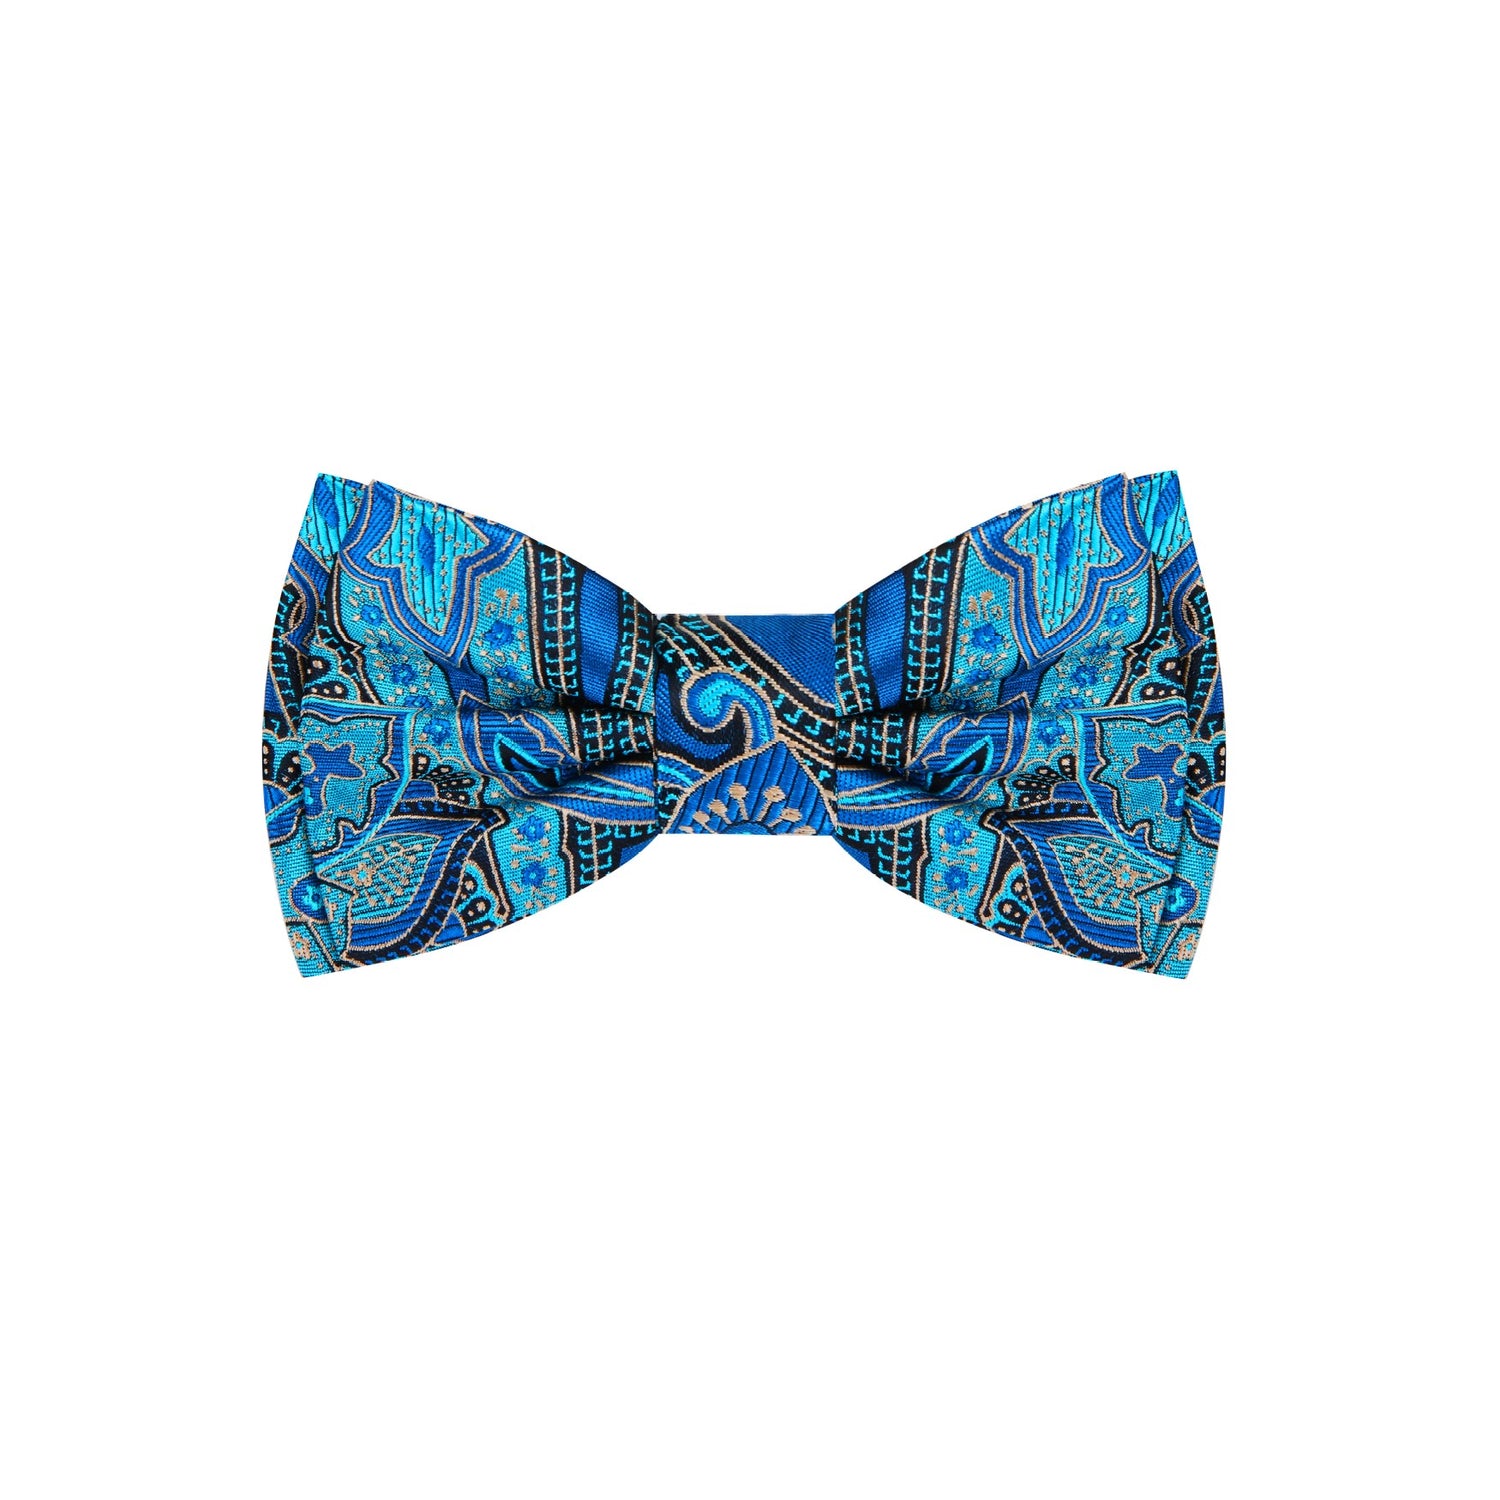 A Teal Blue, Black Abstract Floral Pattern Silk Bow Tie 